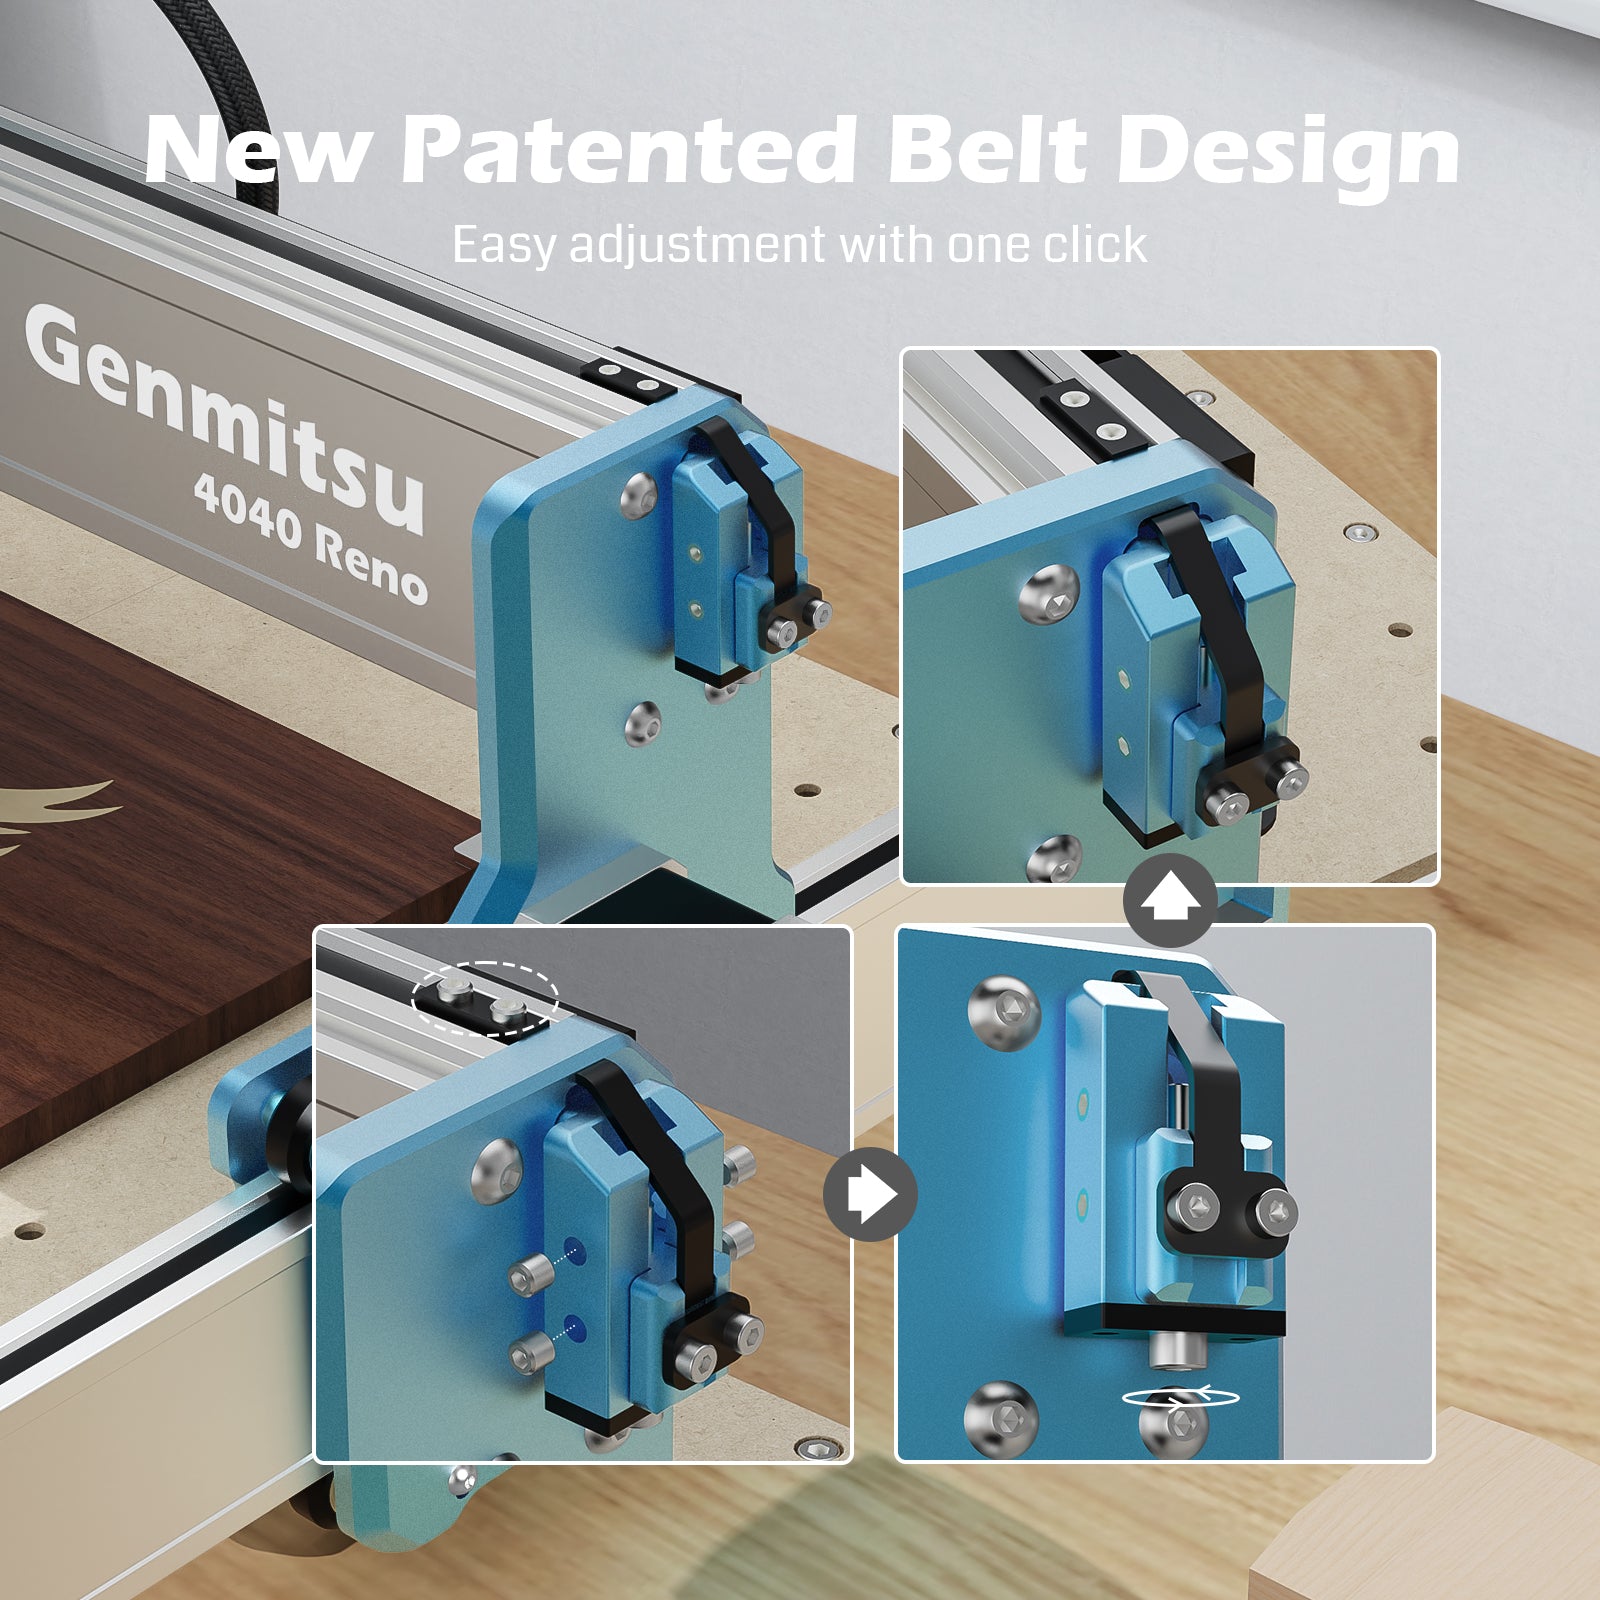 Genmitsu 4040-Reno, First Belt Driven CNC Router (Assembly Guide)